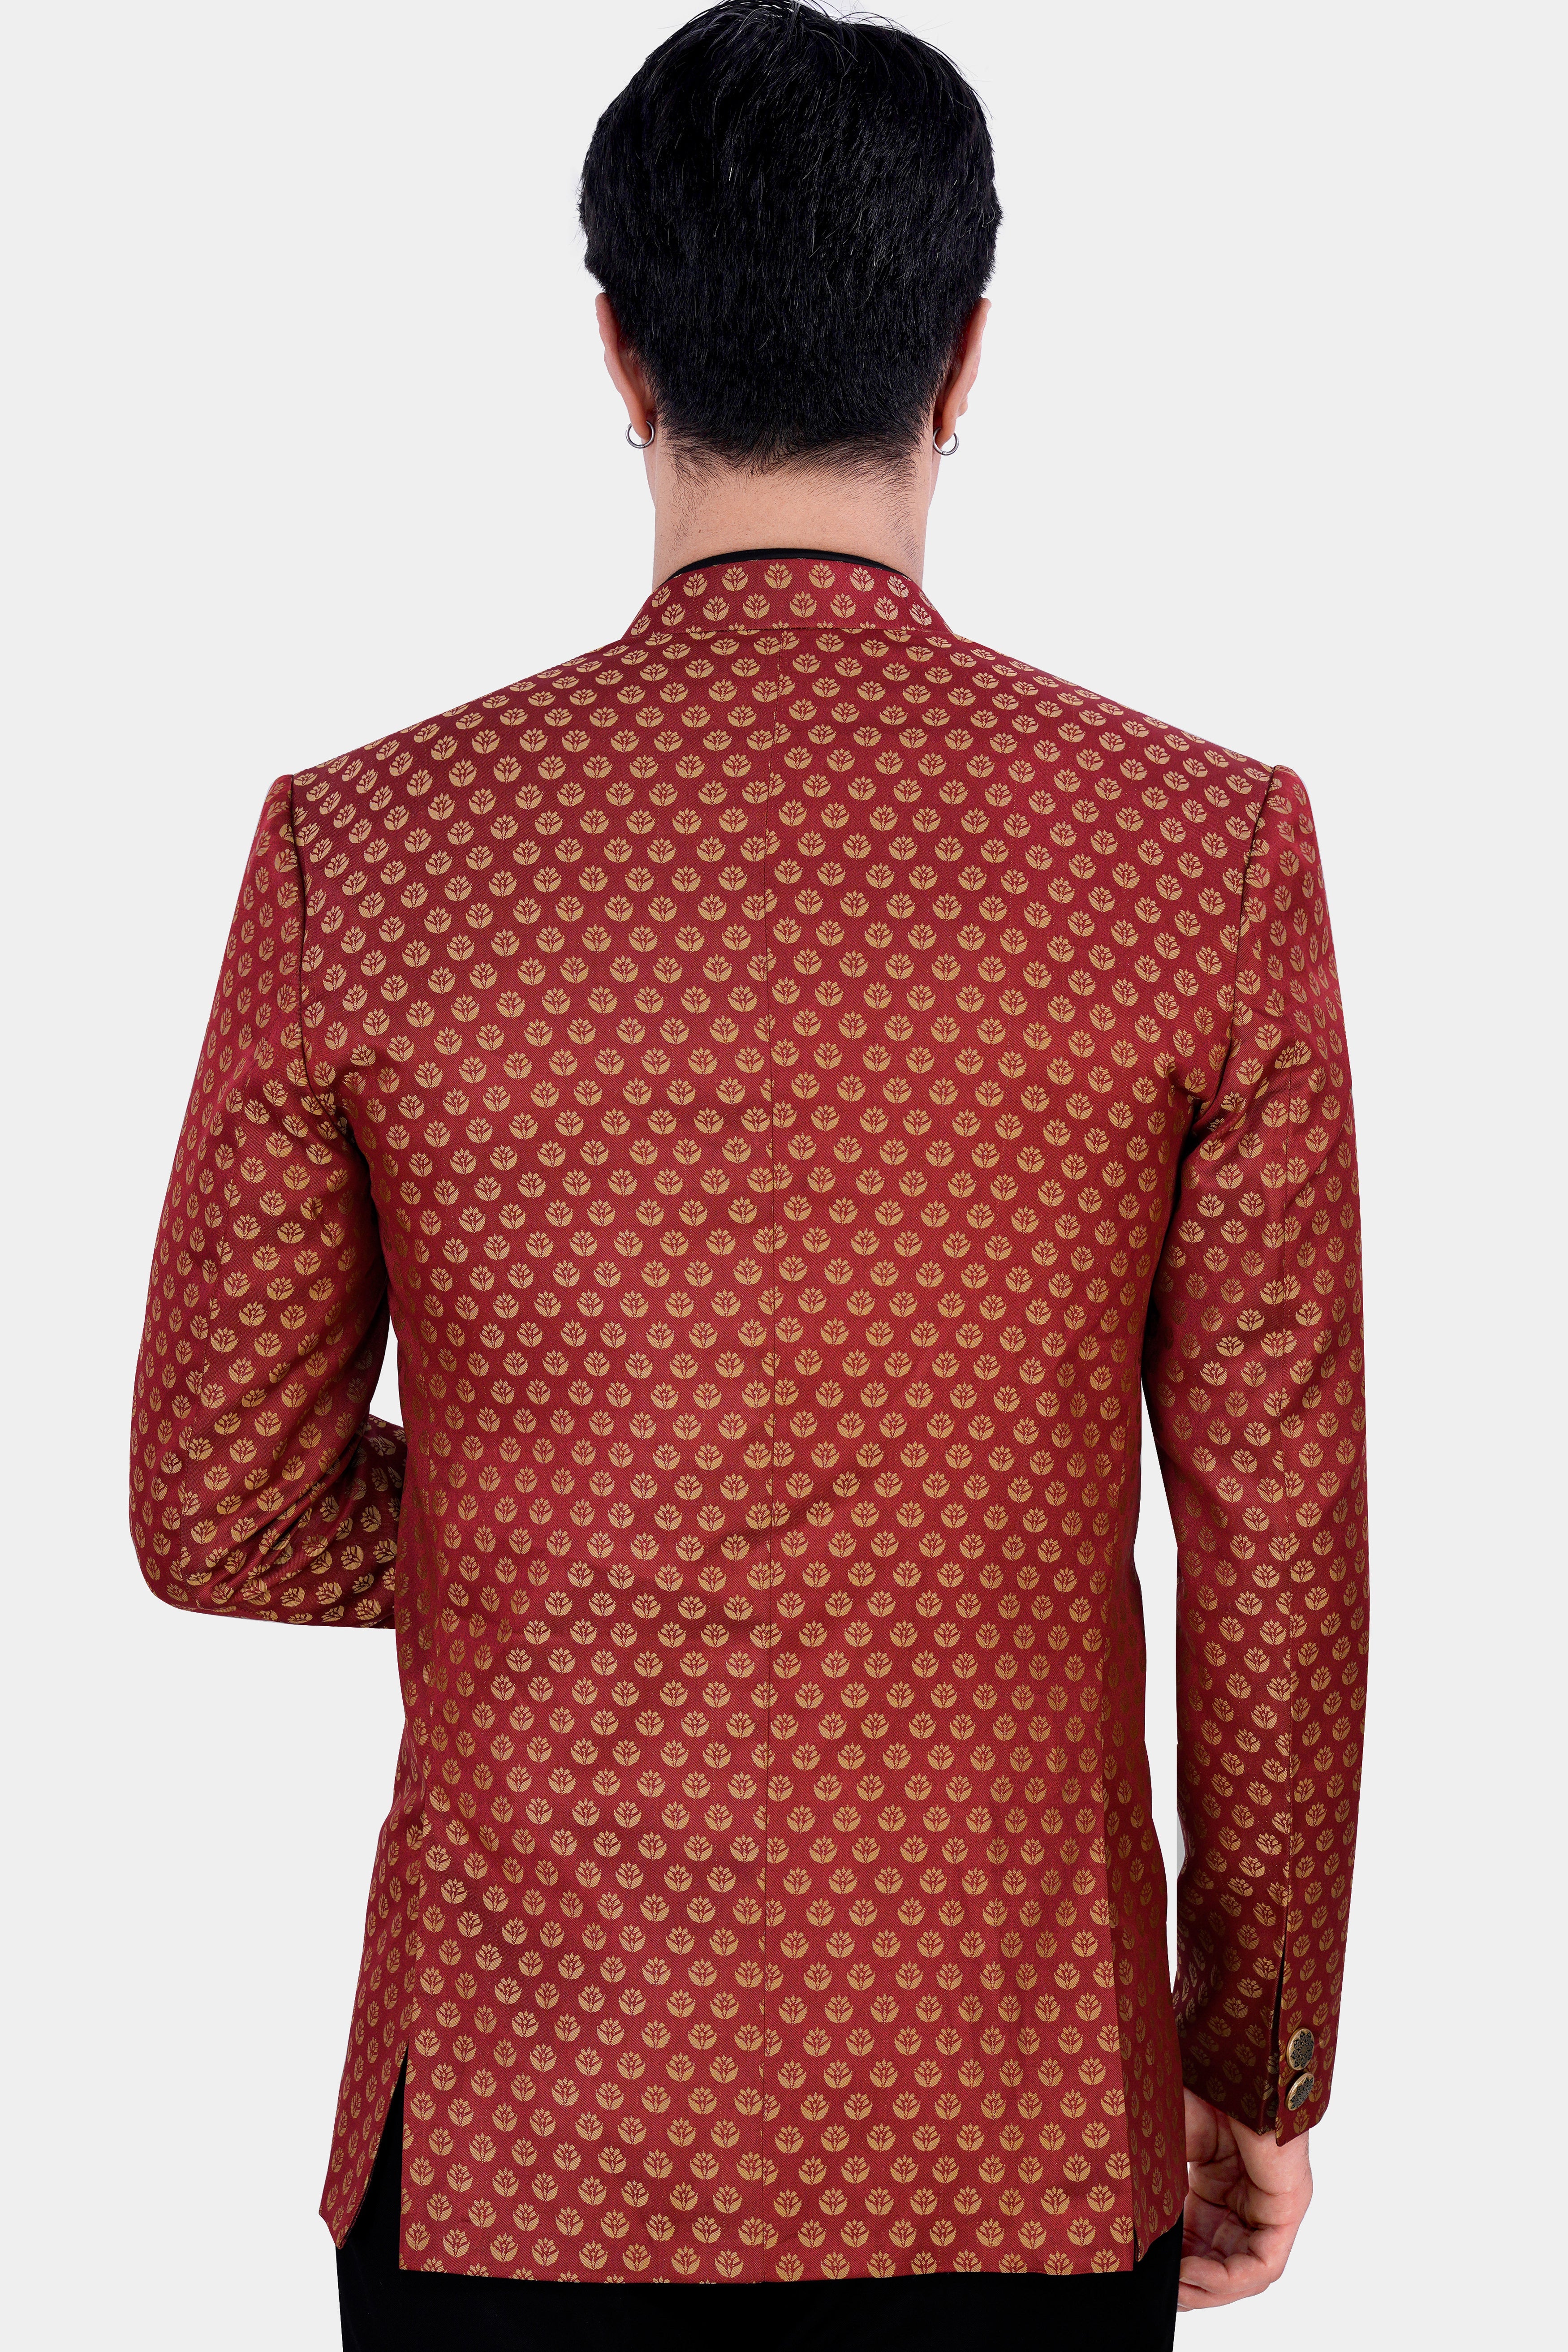 Rose Vale Red and Fawn Brown Textured Bandhgala Designer Blazer BL2863-BG-D319-36, BL2863-BG-D319-38, BL2863-BG-D319-40, BL2863-BG-D319-42, BL2863-BG-D319-44, BL2863-BG-D319-46, BL2863-BG-D319-48, BL2863-BG-D319-50, BL2863-BG-D319-52, BL2863-BG-D319-54, BL2863-BG-D319-56, BL2863-BG-D319-58, BL2863-BG-D319-60